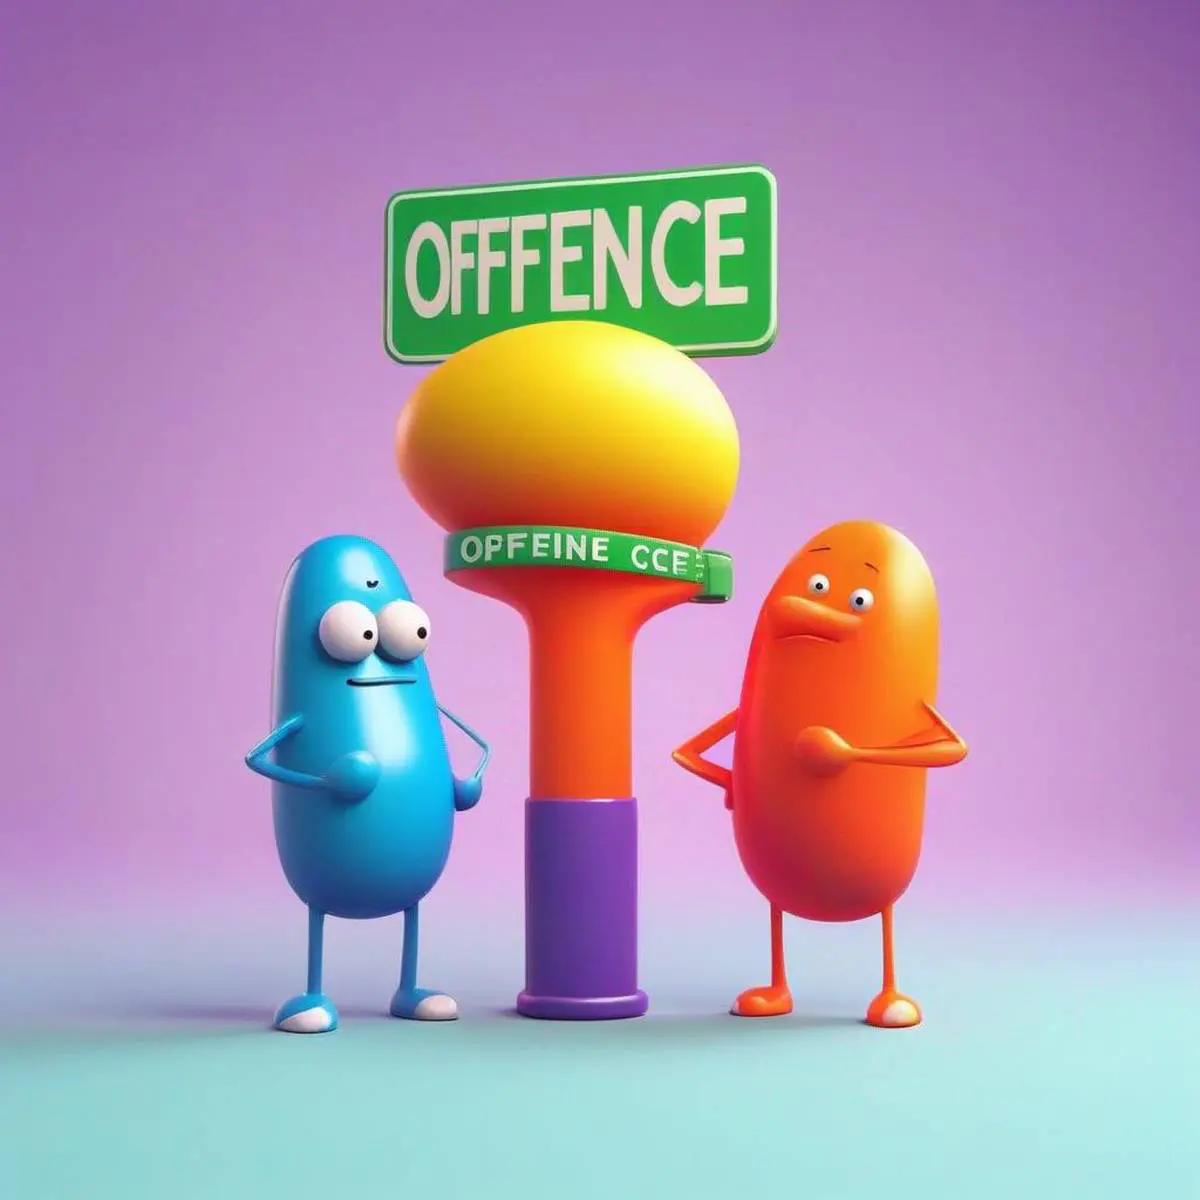 Offence puns